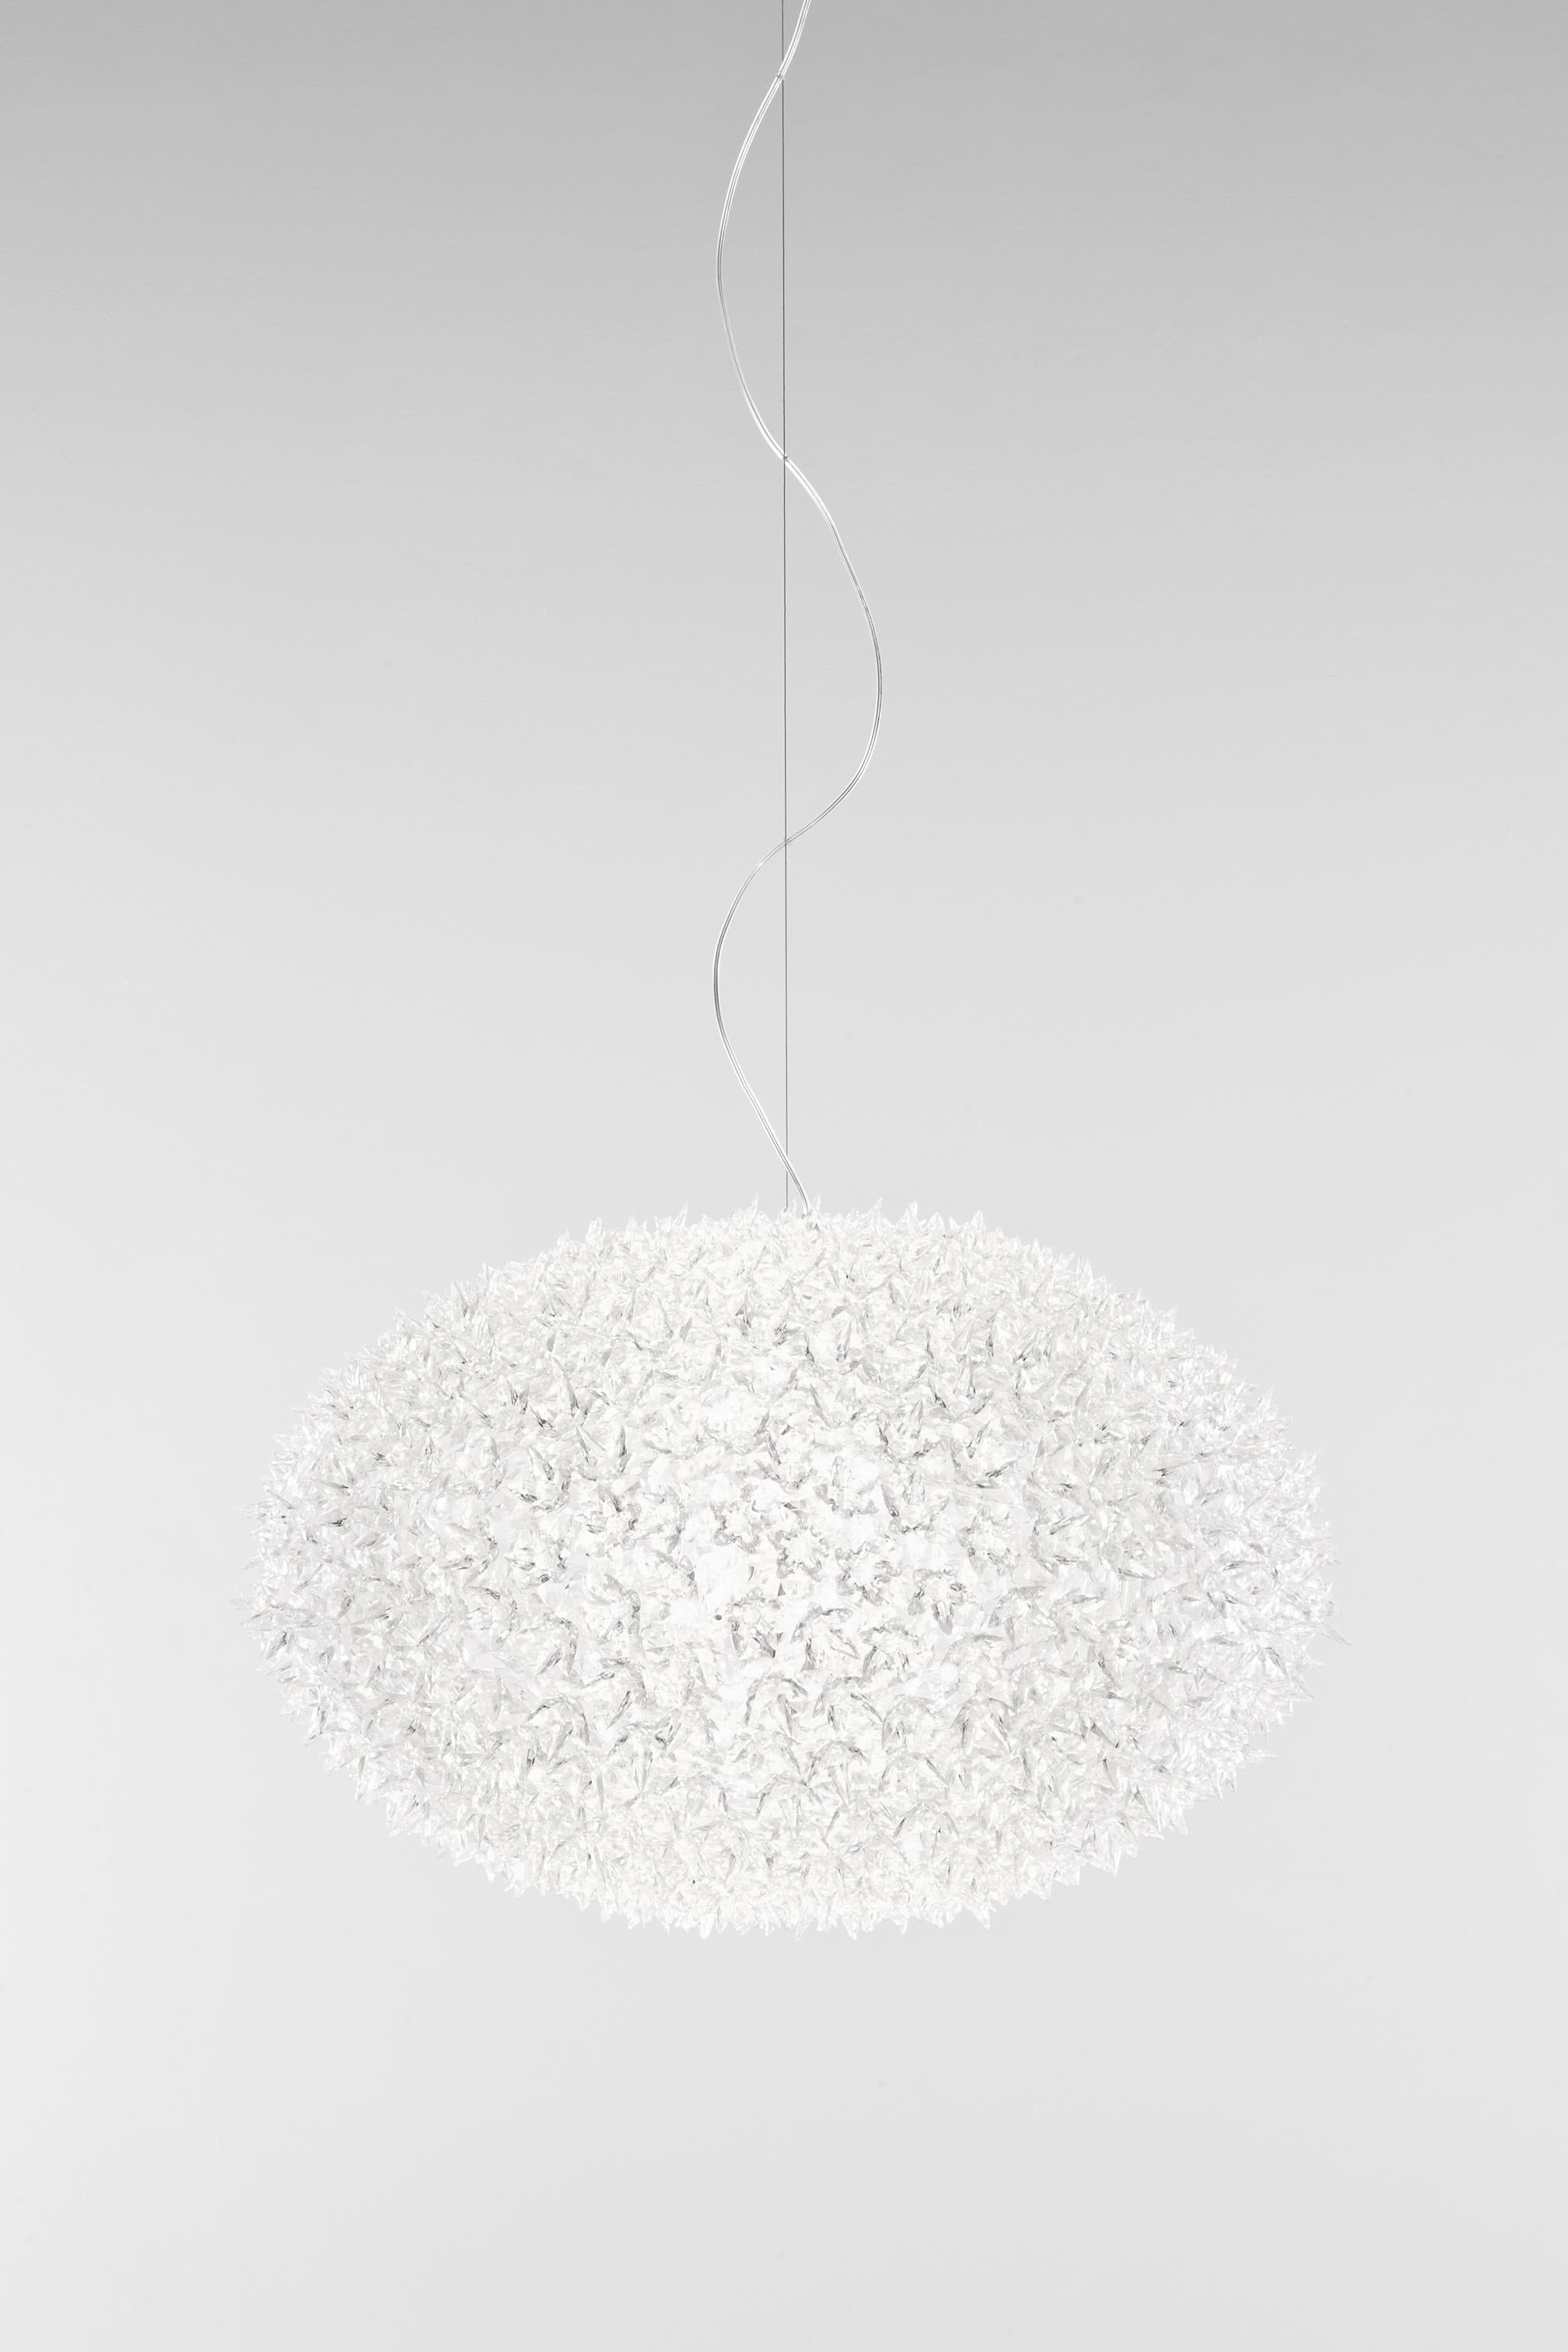 Bloom is a tubular polycarbonate framework entirely covered by a structure of tiny transparent polycarbonate double corolla flowers. The result is an industrially produced lamp but with all the forms and stylistic complexity of a unique handcrafted